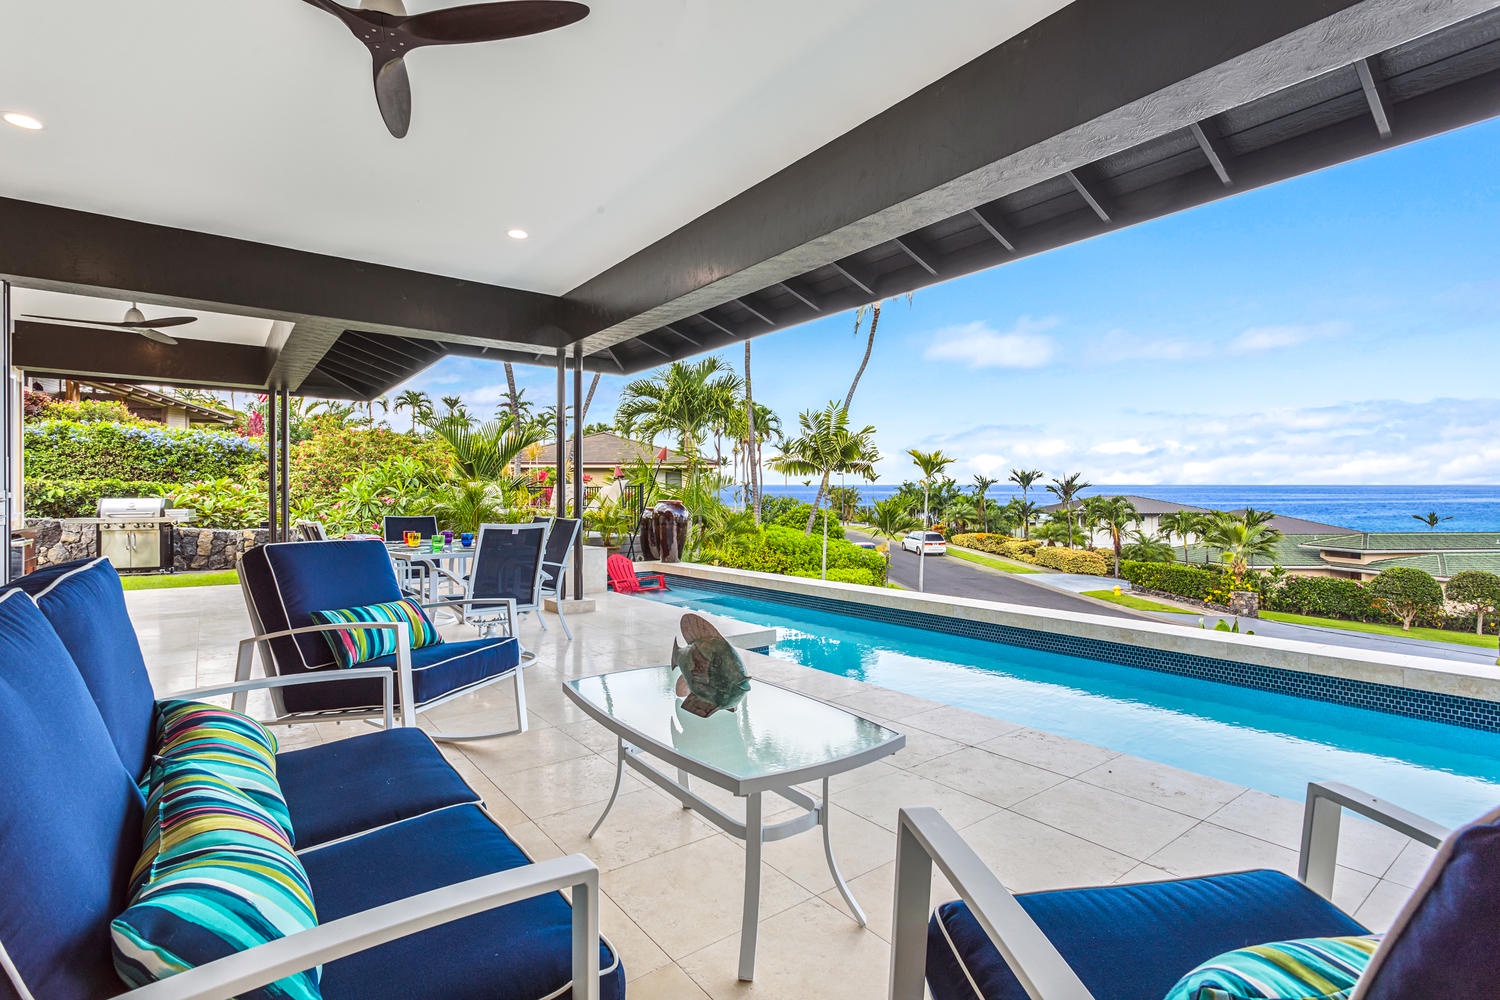 Kailua Kona Vacation Rentals, Ohana le'ale'a - The lanai is the perfect spot for watching the seasonal whales, swimming in the lap pool, and relaxing in the spa